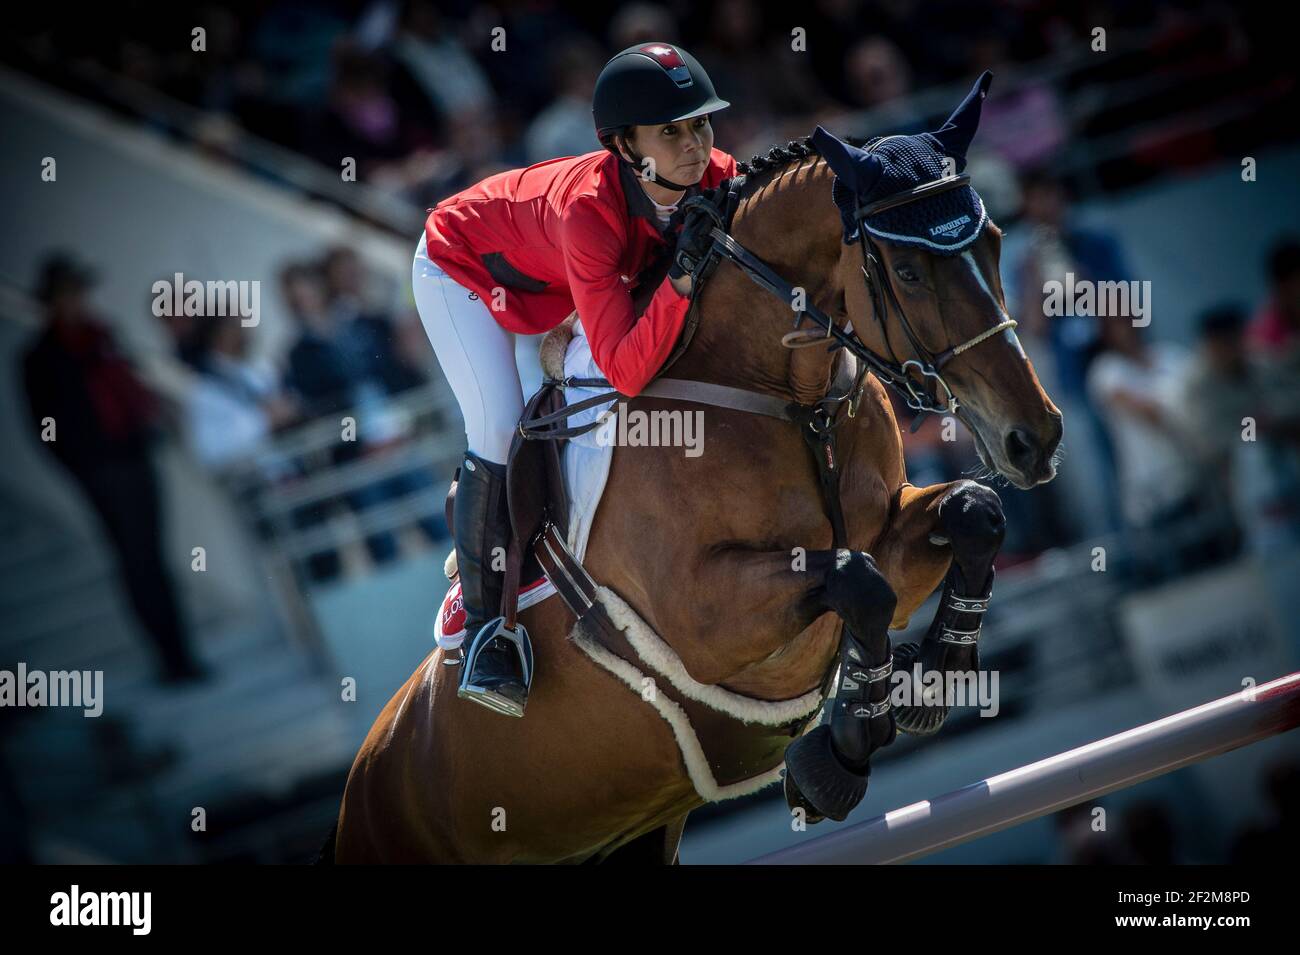 JANE RICHARD PHILIPS RIDING ON PABLO DE VIRTON during Furusiyya FEI Nations Cup? of the Jumping CSIO of France on May 15-18th, 2014, in La Baule, France - 16/05/14 - Photo Christophe Bricot / DPPI Stock Photo